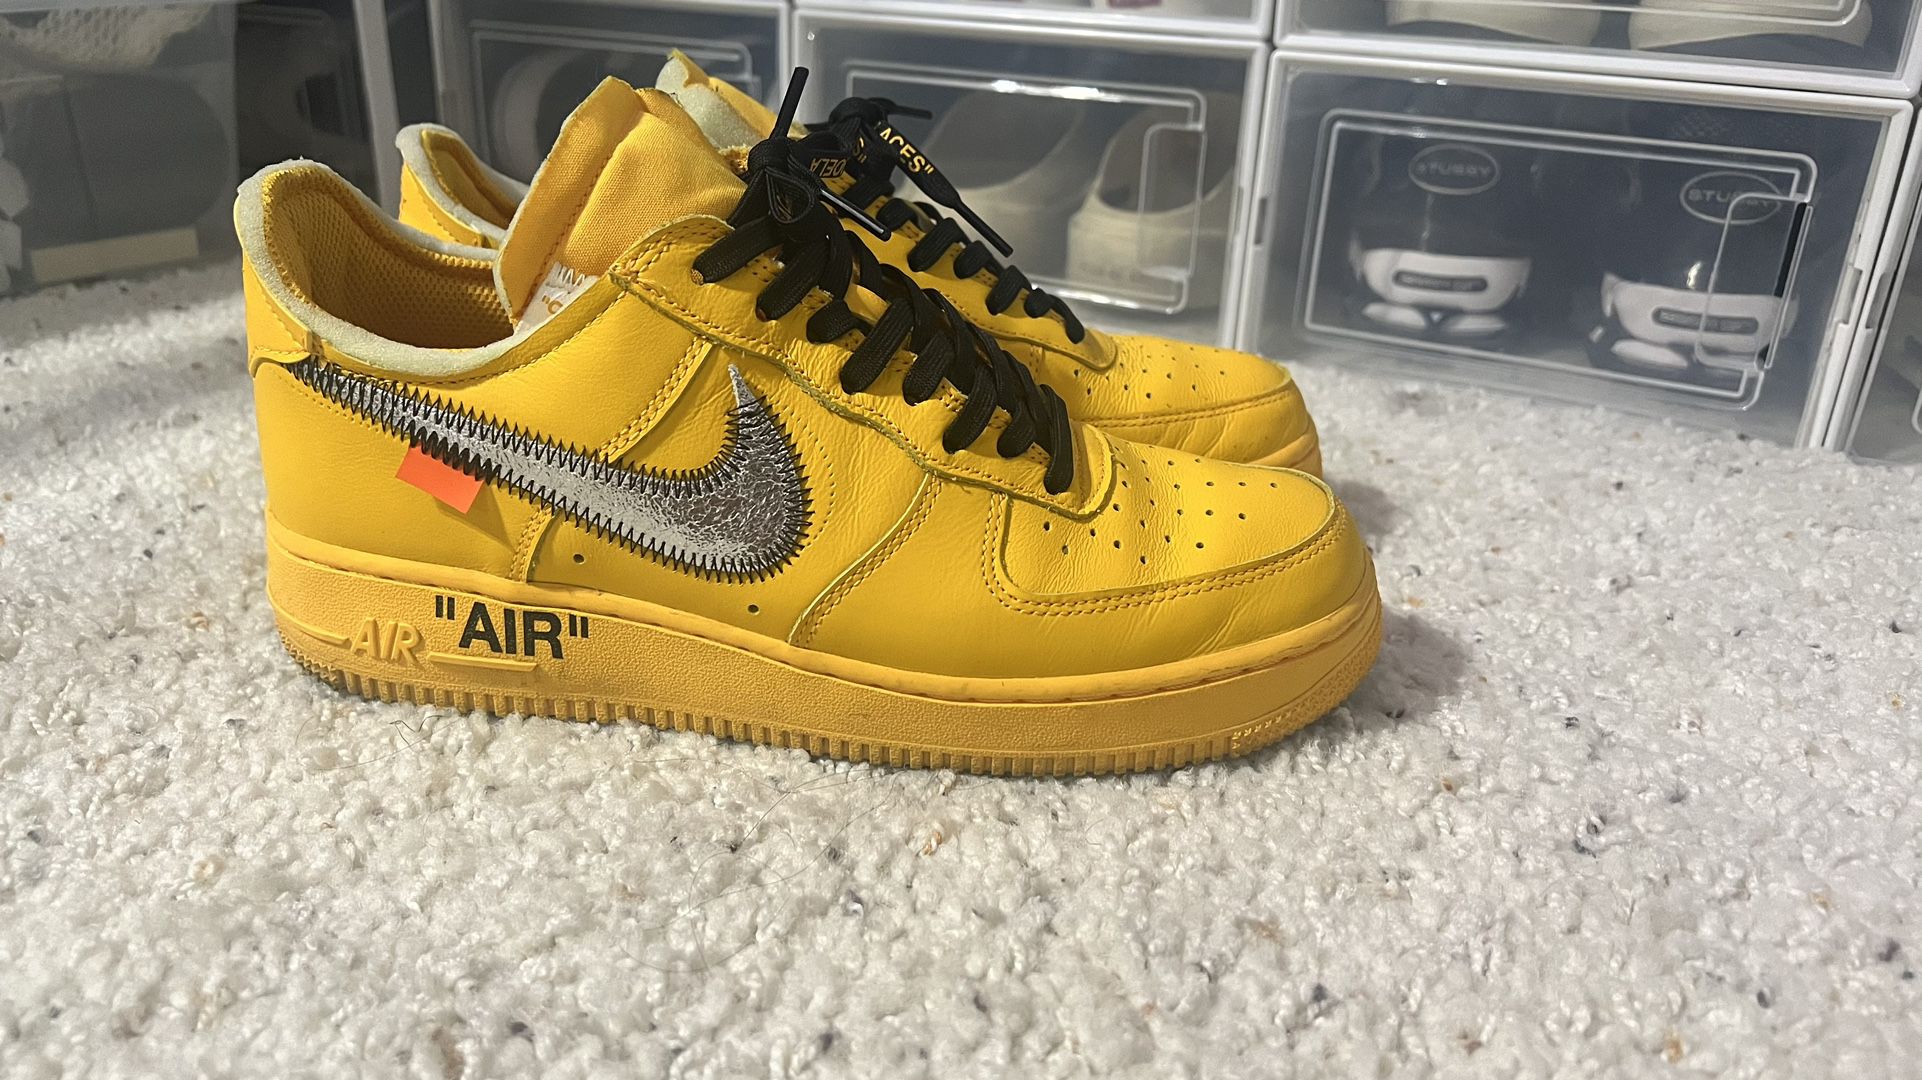 Nike Off White Air Force 1 ICA Lemonade Size 7.5 for Sale in Las Vegas, NV  - OfferUp